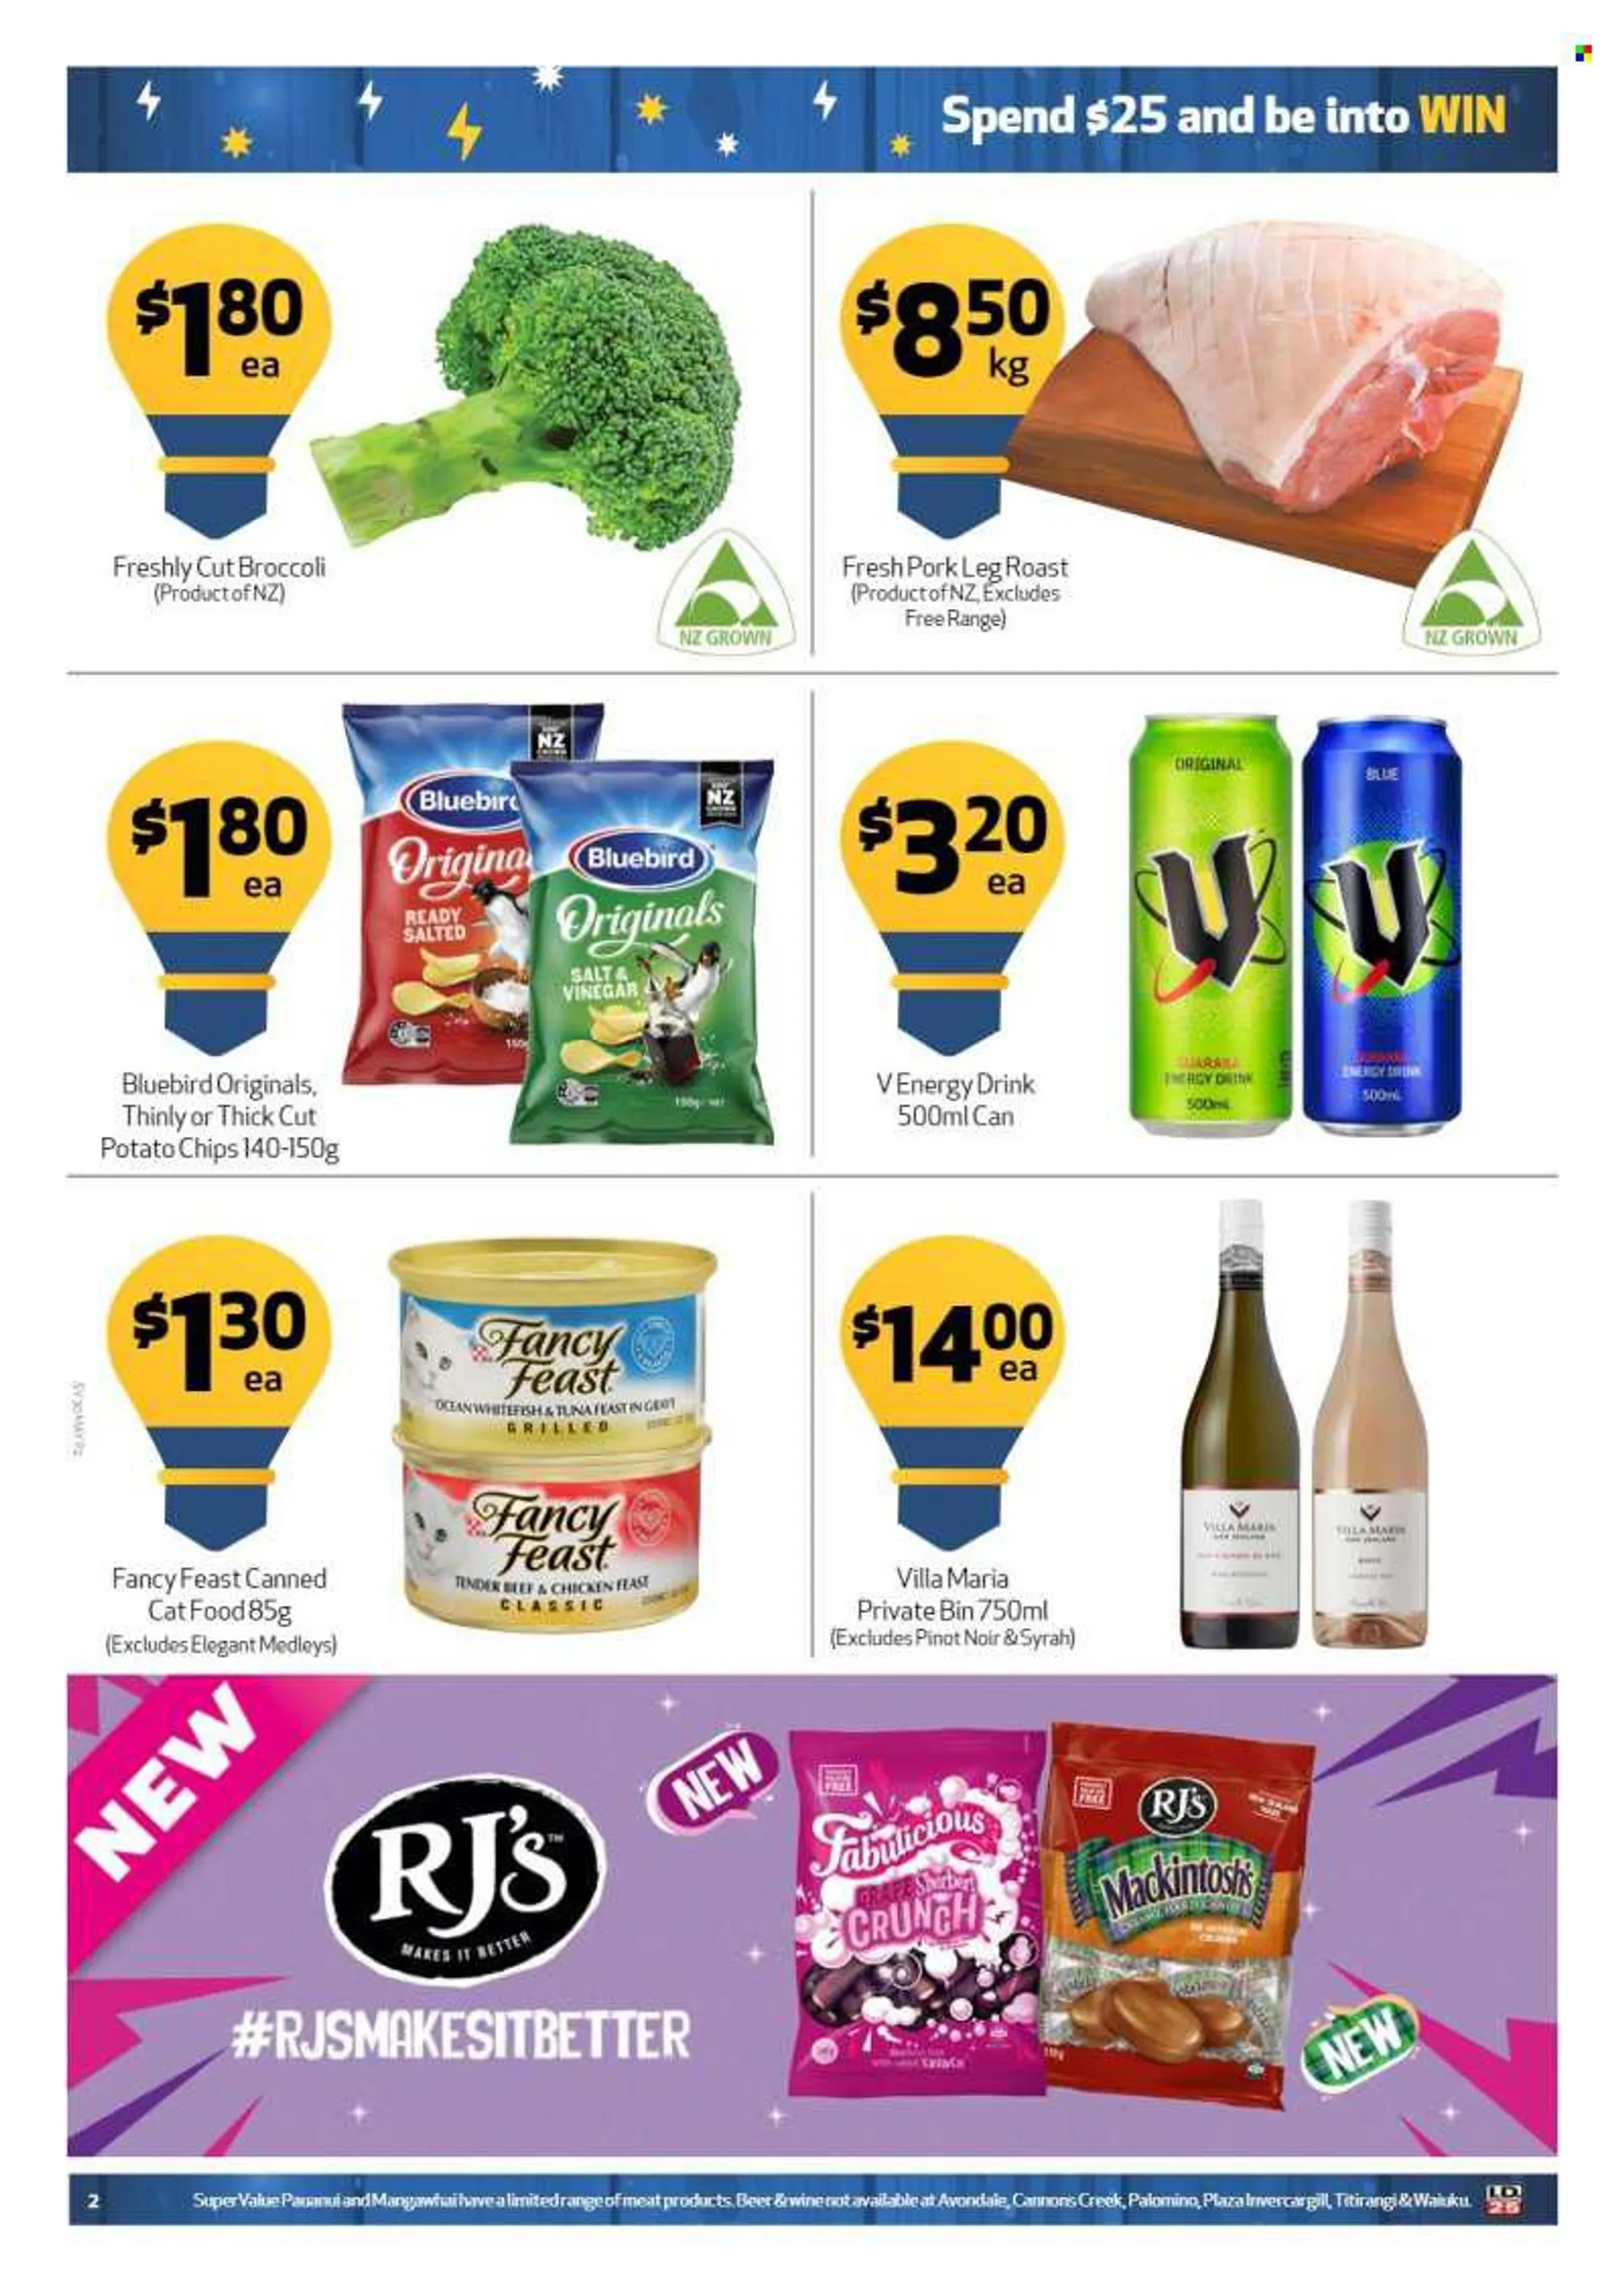 SuperValue mailer - 30.05.2022 - 05.06.2022. - 30 May 5 June 2022 - Page 2